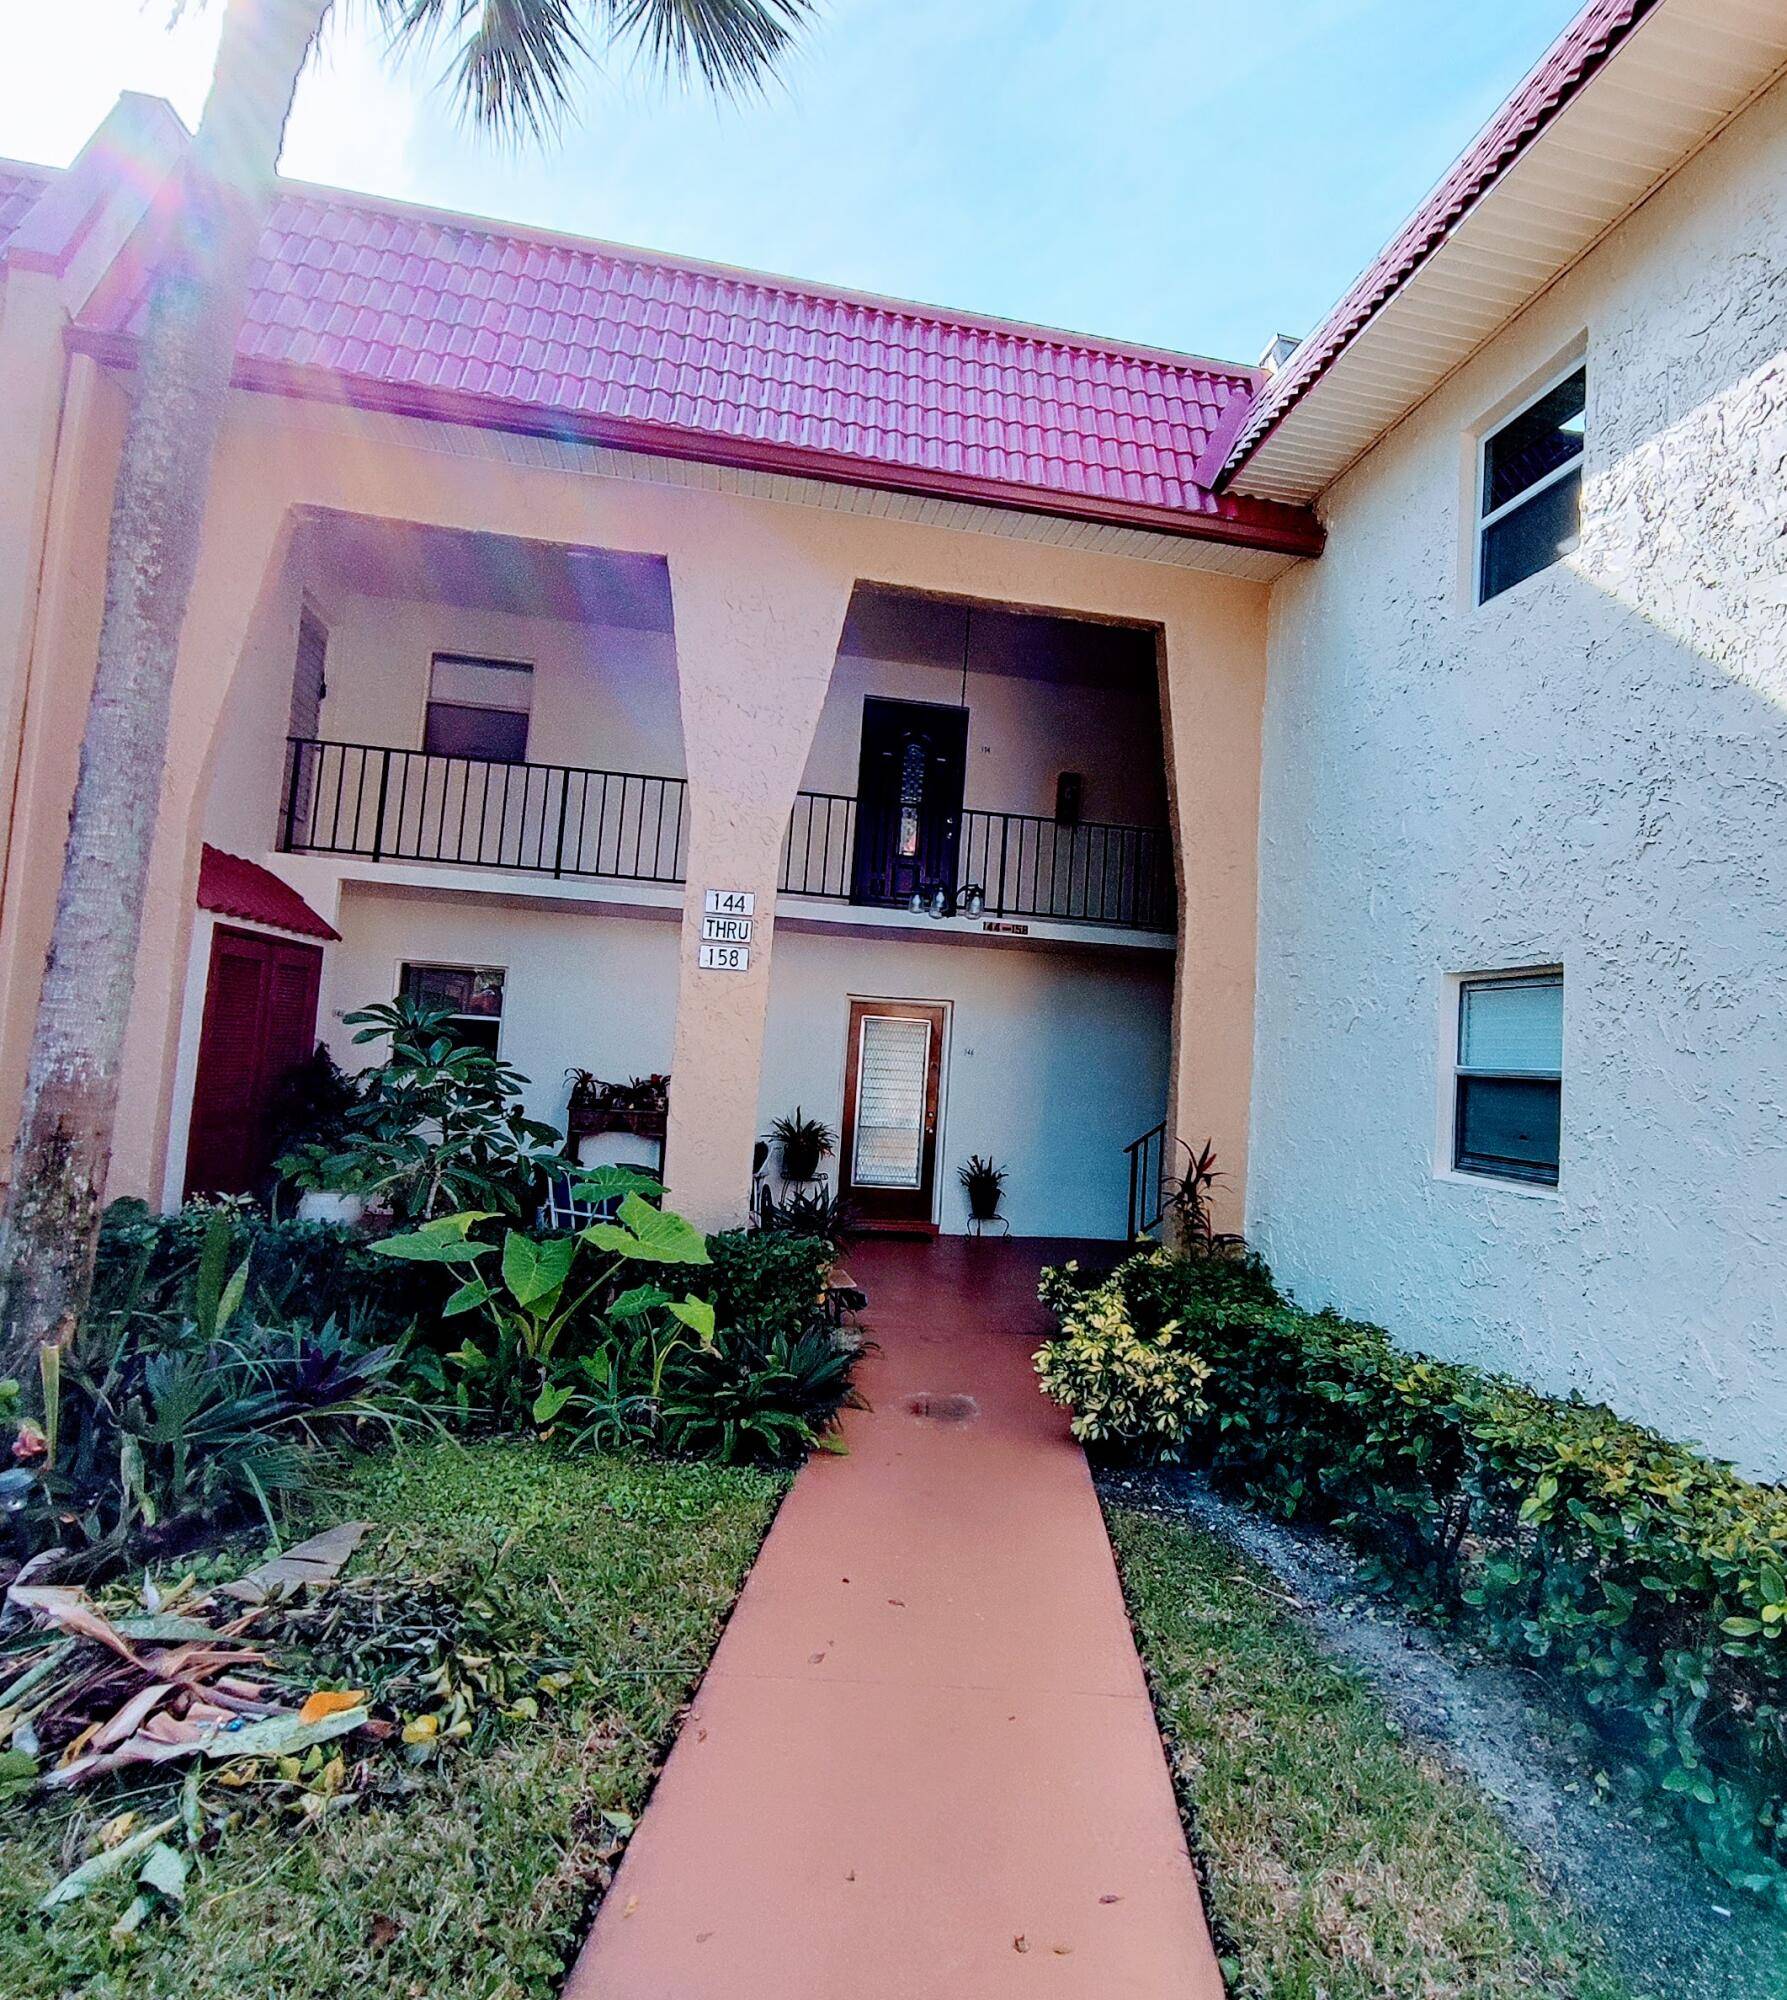 Experience tranquility and luxury in this 1 bed, 1 bath corner unit at 150 Lake Evelyn Dr, West Palm Beach, FL 33411.